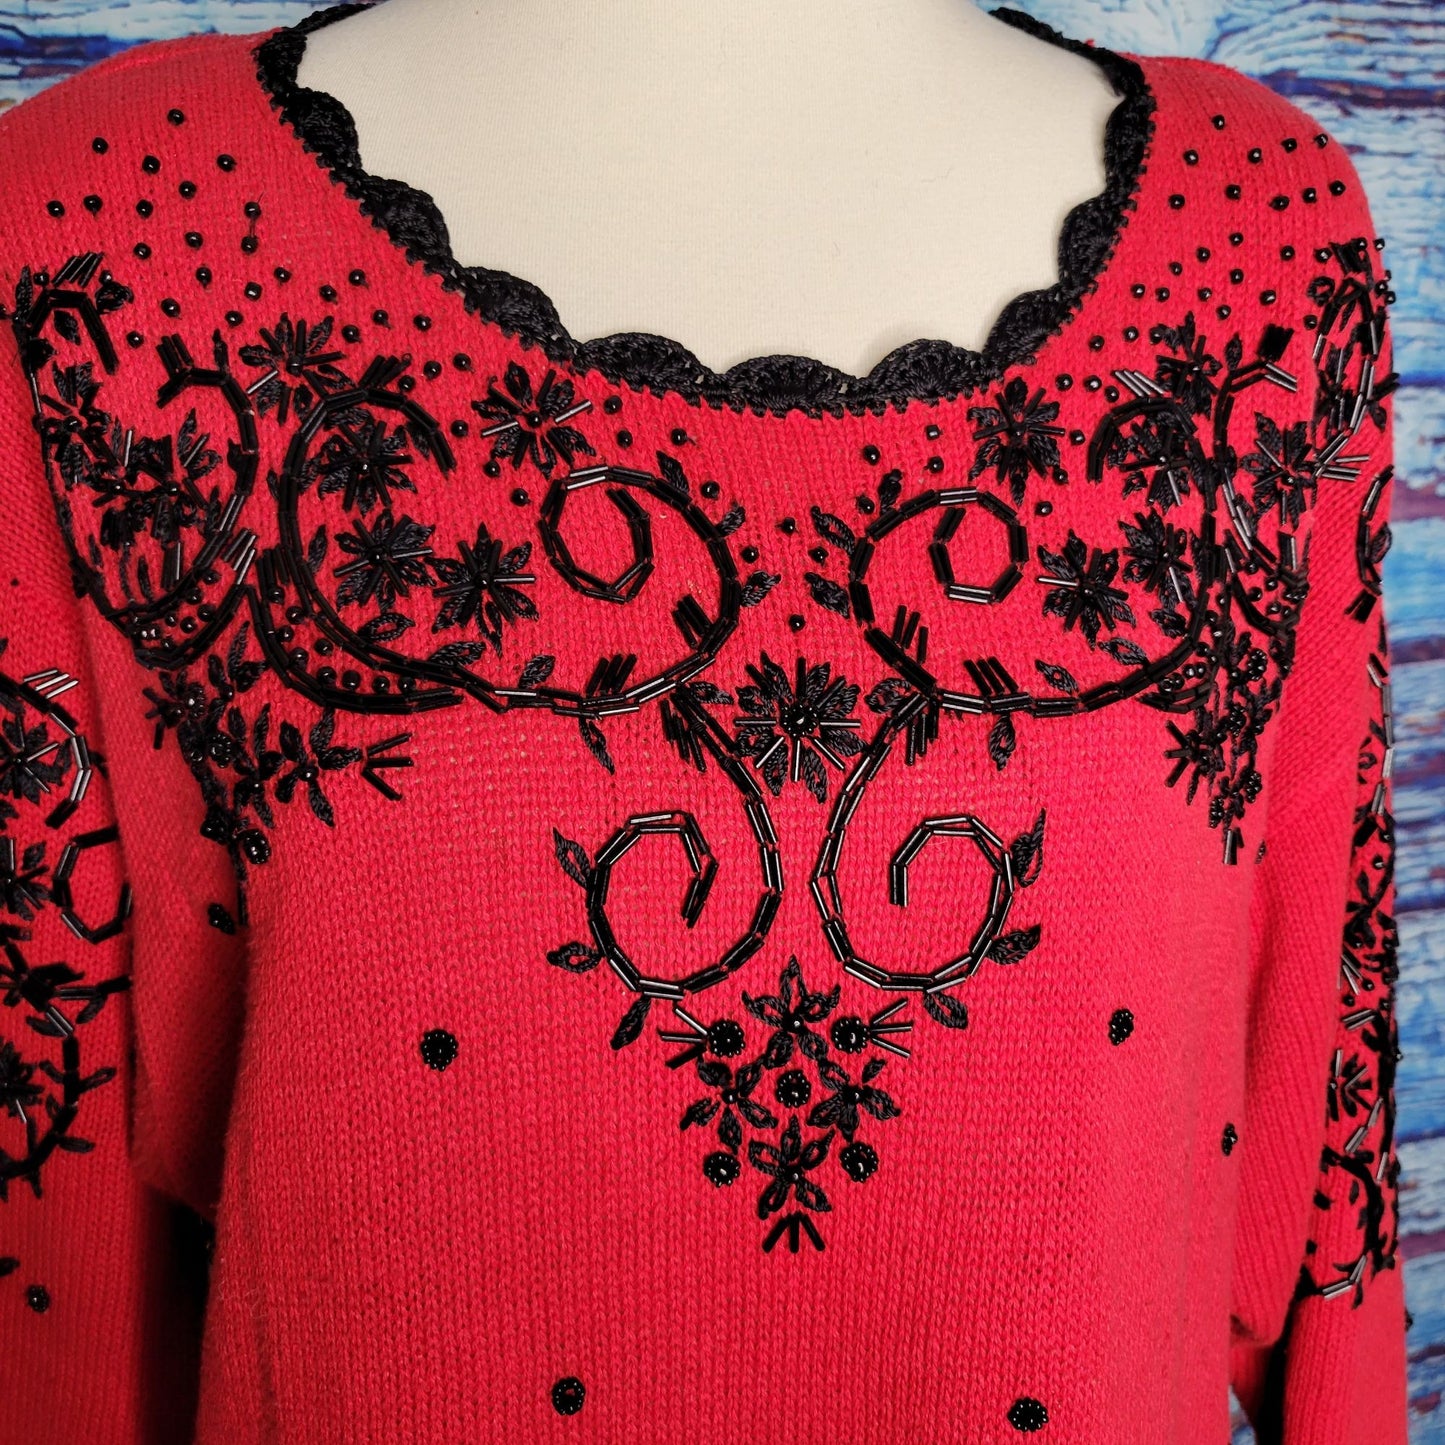 Vintage Red & Black Beaded Christmas Sweater by Work In Progress